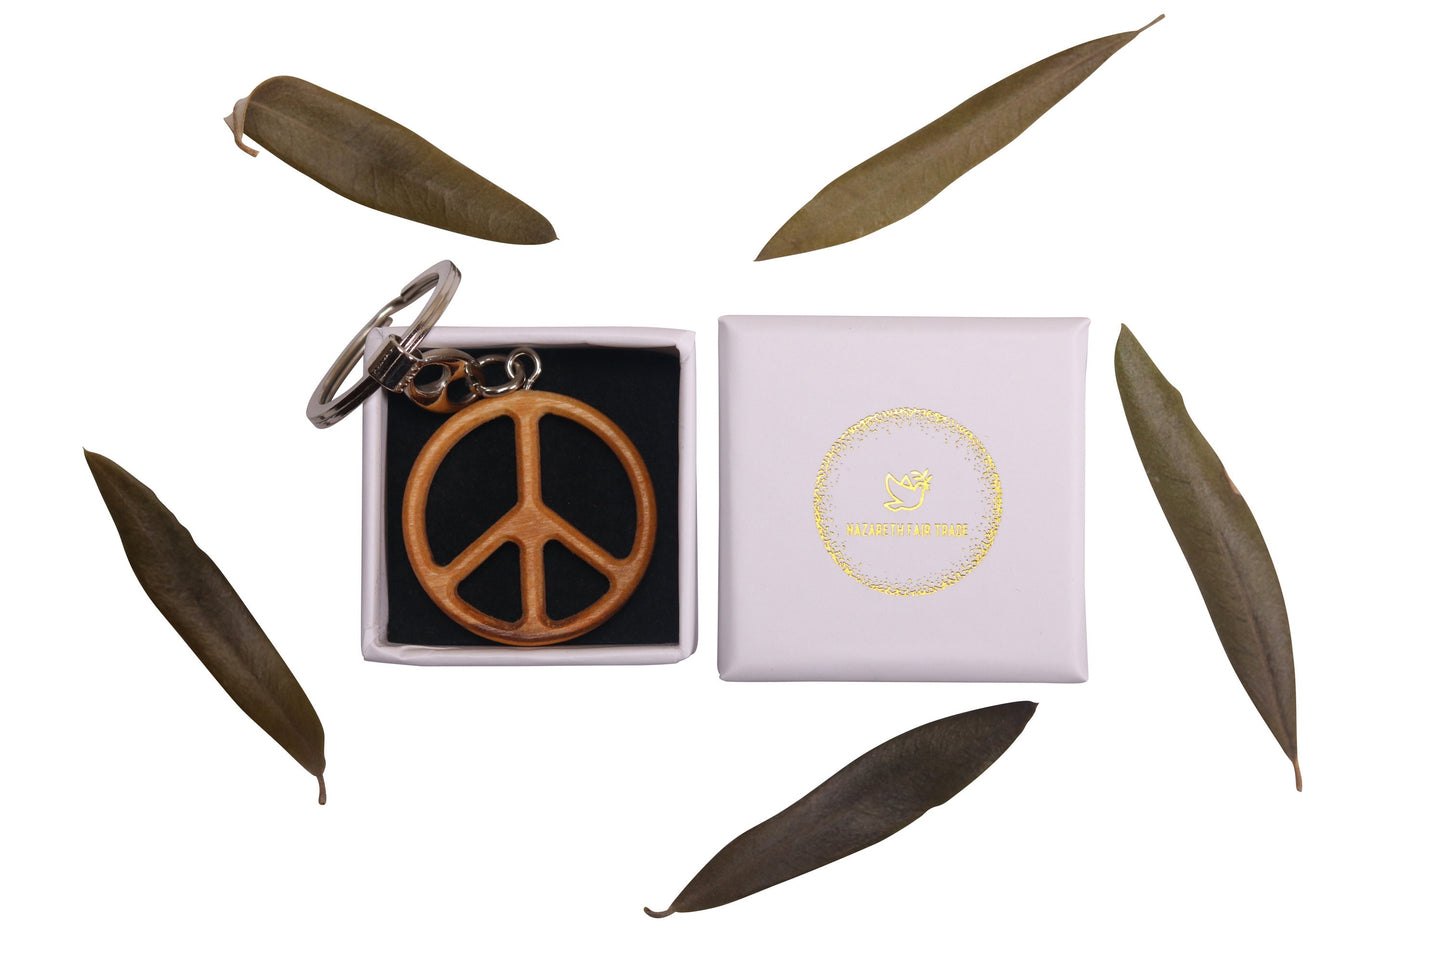 Handmade Olive Wood Peace Sign Keychain, Pendant Symbol, Hand Crafted In Nazareth